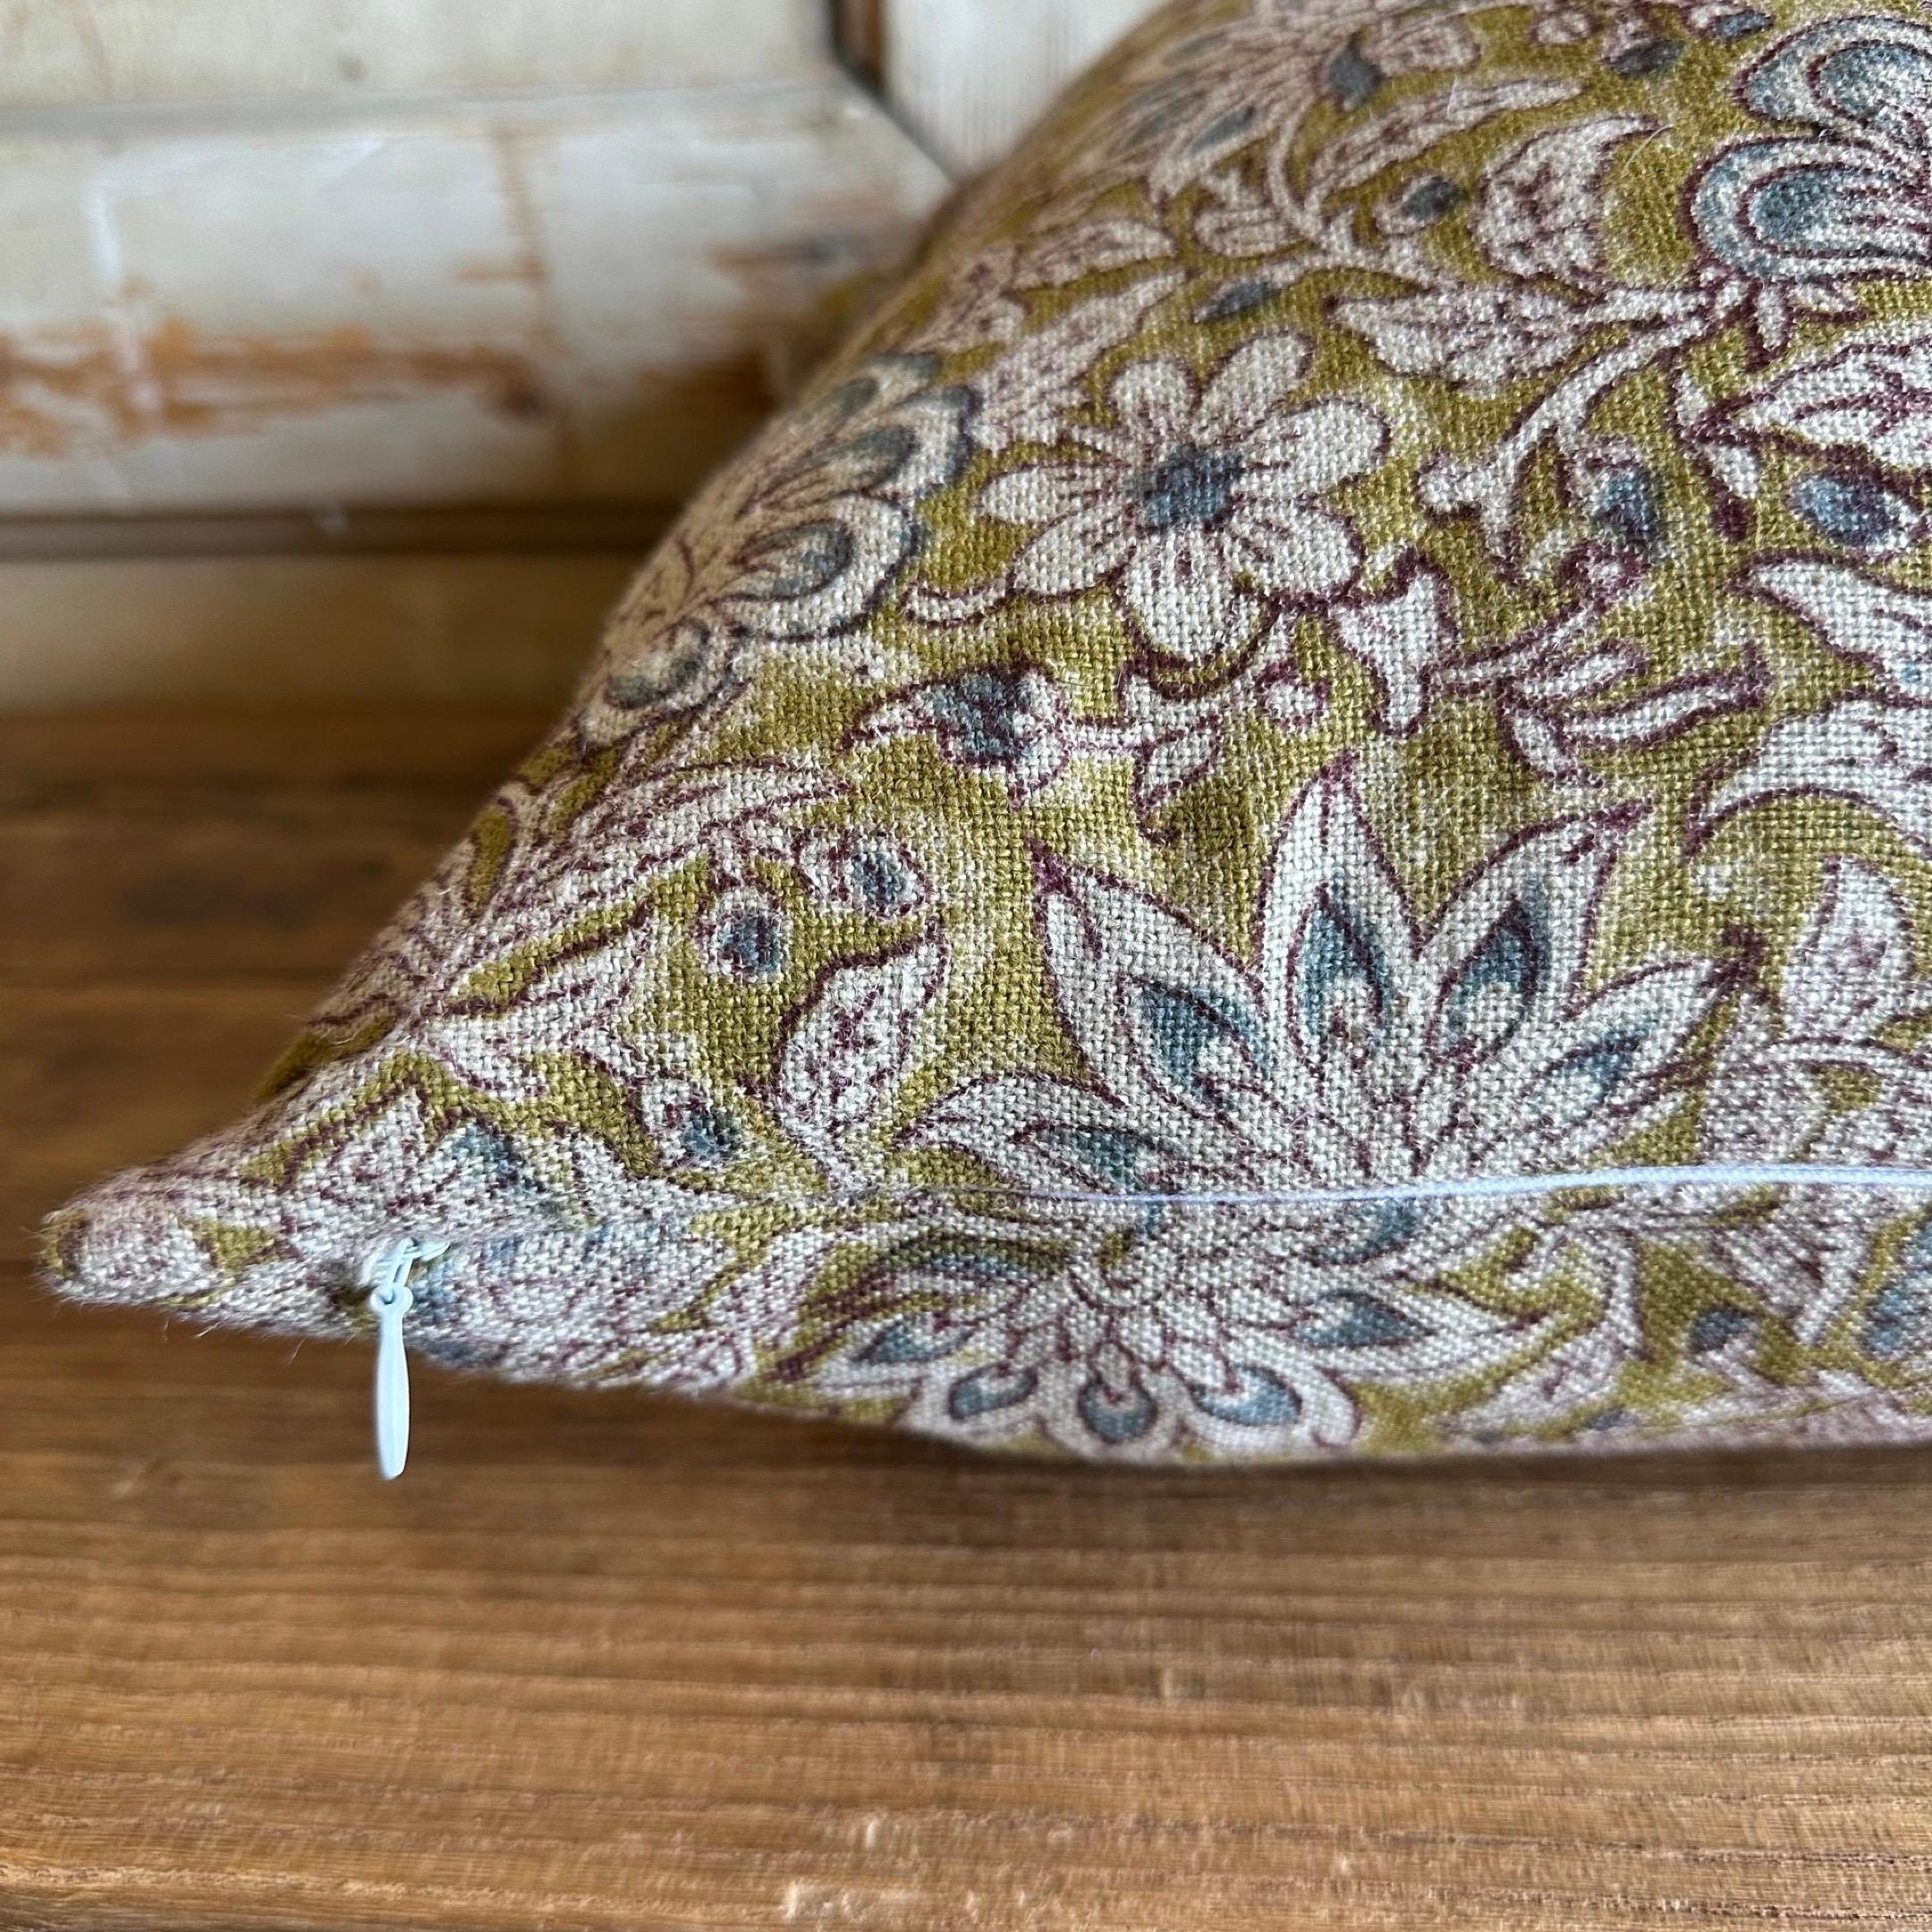 Beautifully hand block-printed pillow on heavy linen fabric.
Zipper closure. 
Double Sided Pillow, Front and Back show the same block-printed linen.
Care Instructions: Dry clean recommended.


